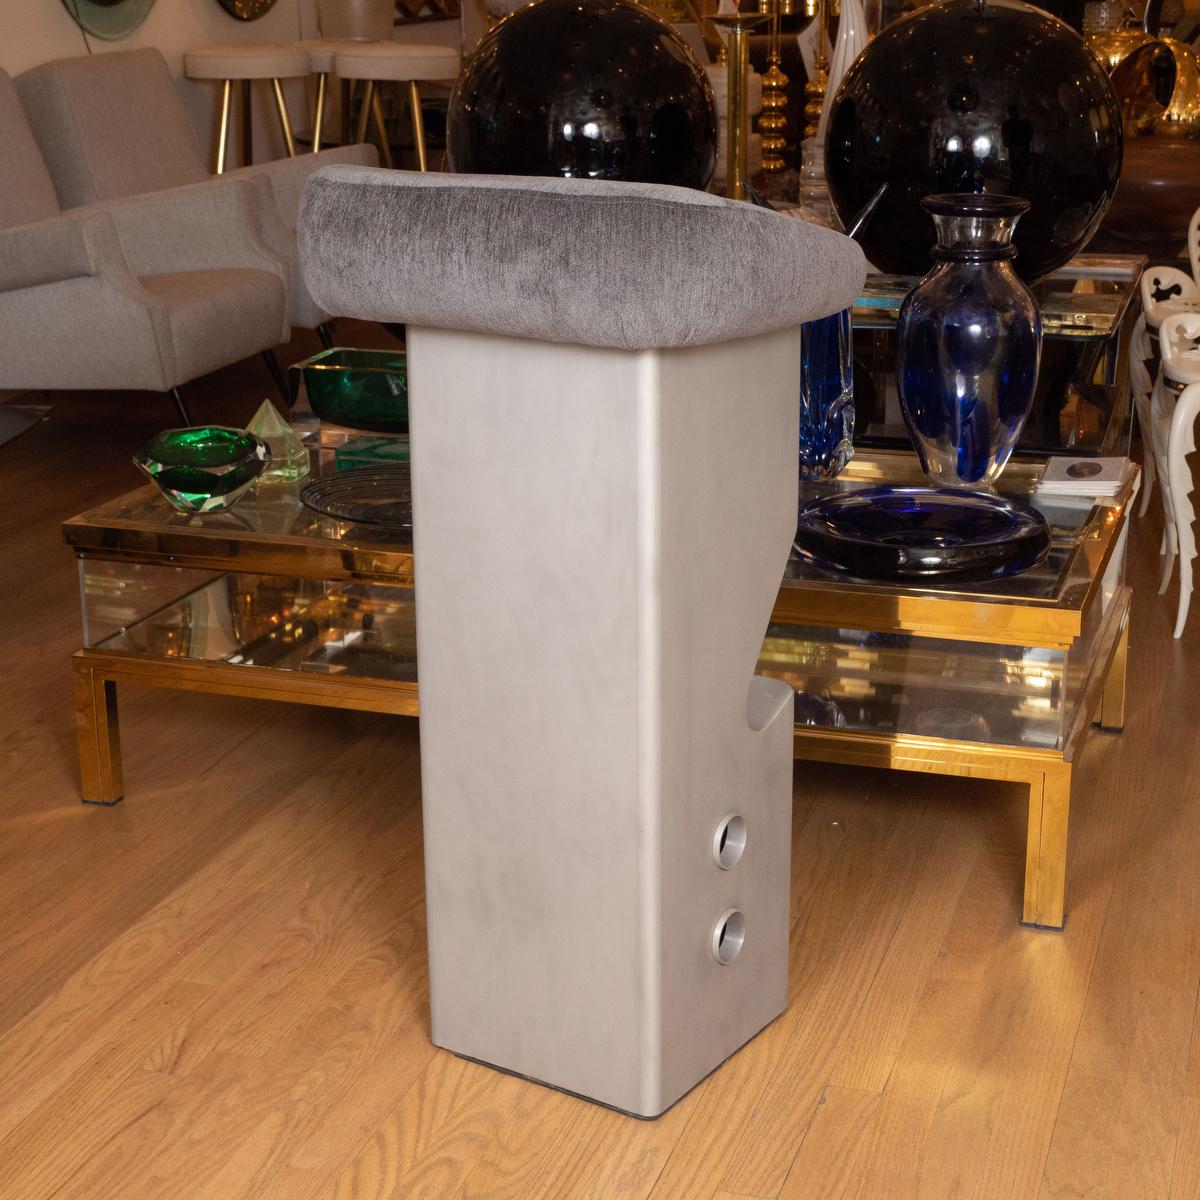 Sculptural stainless steel bar stool with upholstered seat.